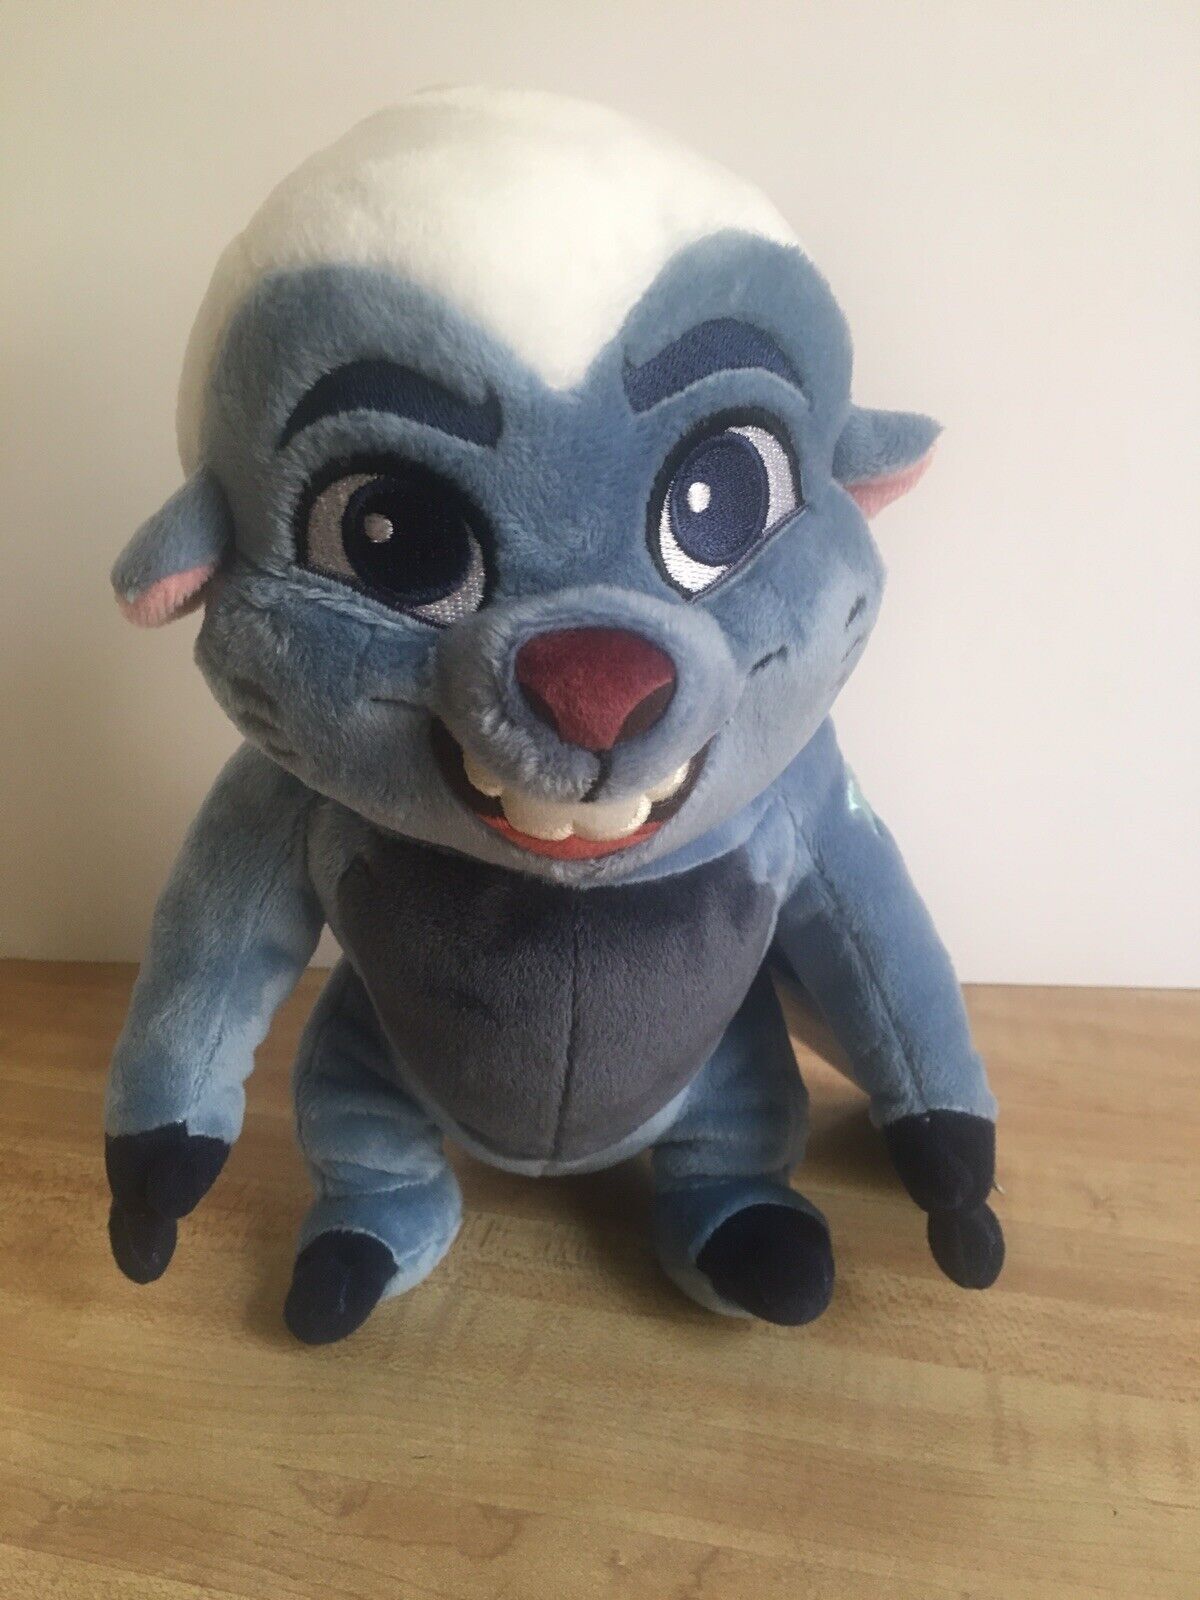 Disney Store Bunga 9 1/2” Plush (The Lion Guard Collection) NEW with Tags